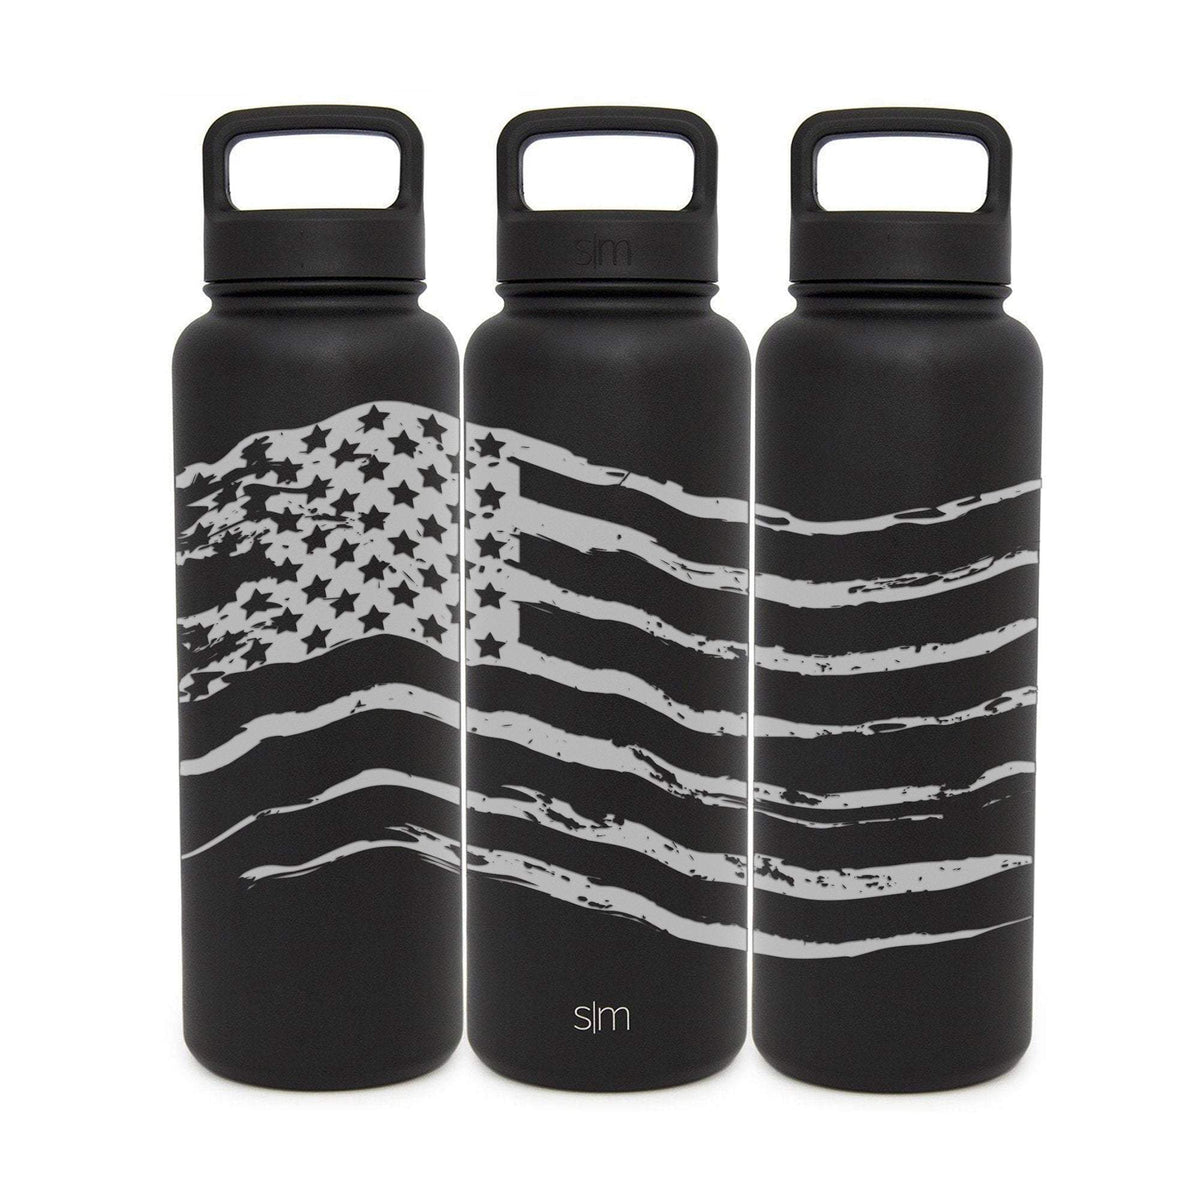 https://integritybottles.com/cdn/shop/products/full-360-all-american-flag-stainless-steel-40-oz-midnight-black-water-bottle-with-extra-lid-by-leitlein-design-integrity-bottles-16114211061859_1200x.jpg?v=1601746122